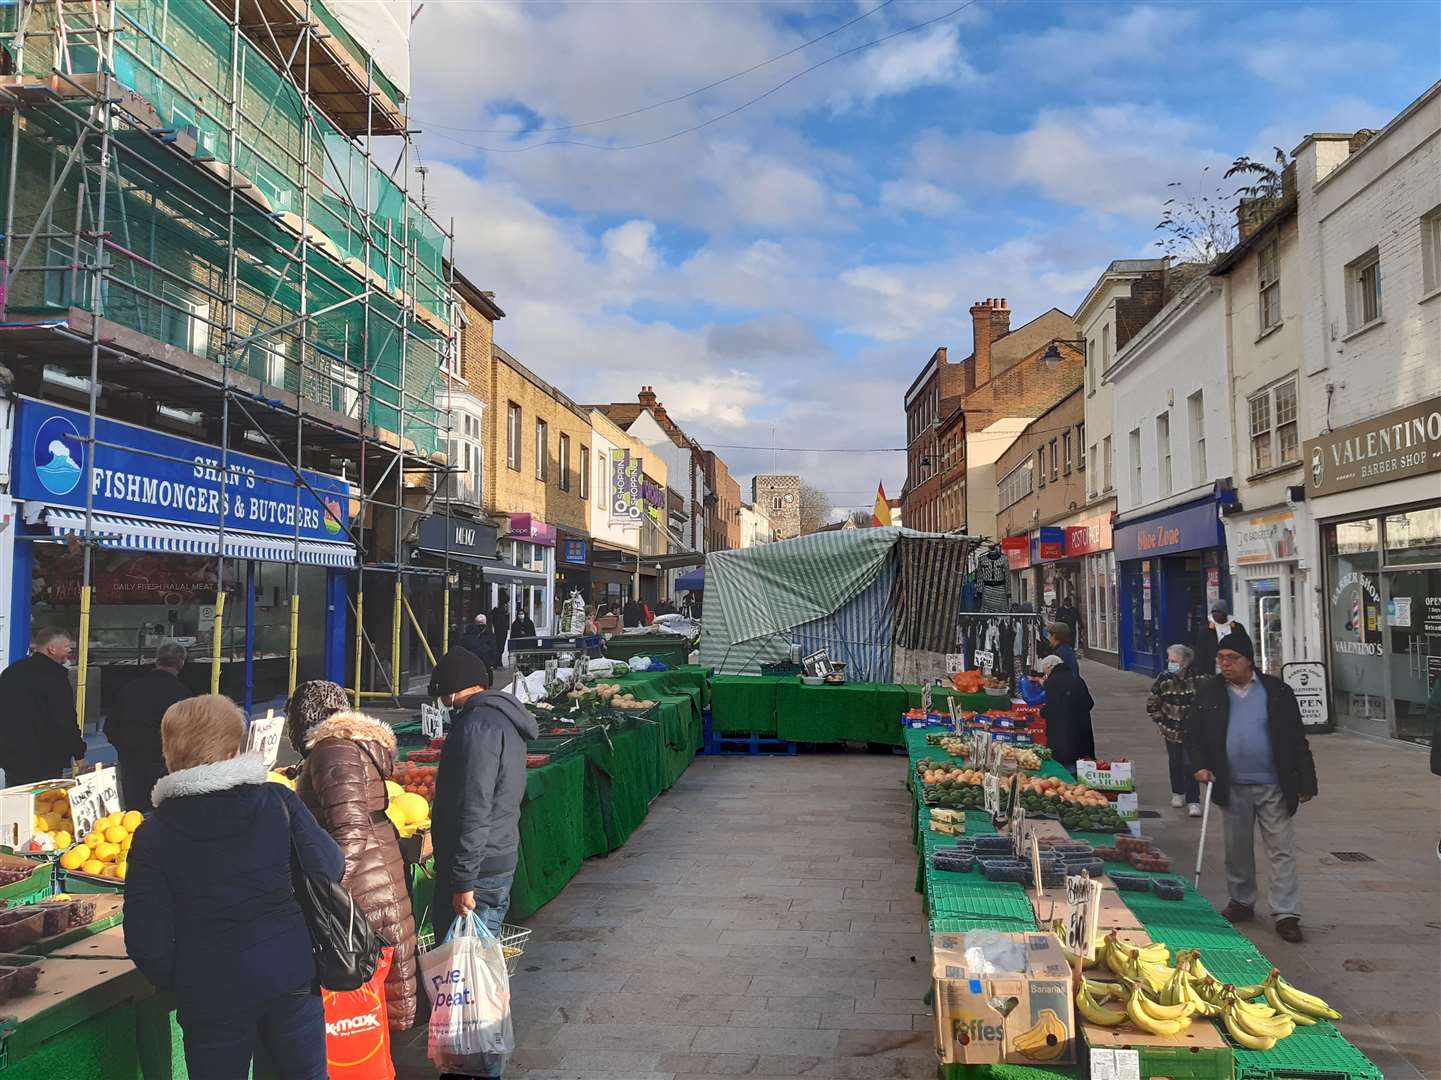 Dartford's Thursday market is back open for business and vying for trade. Photo: Sean Delaney